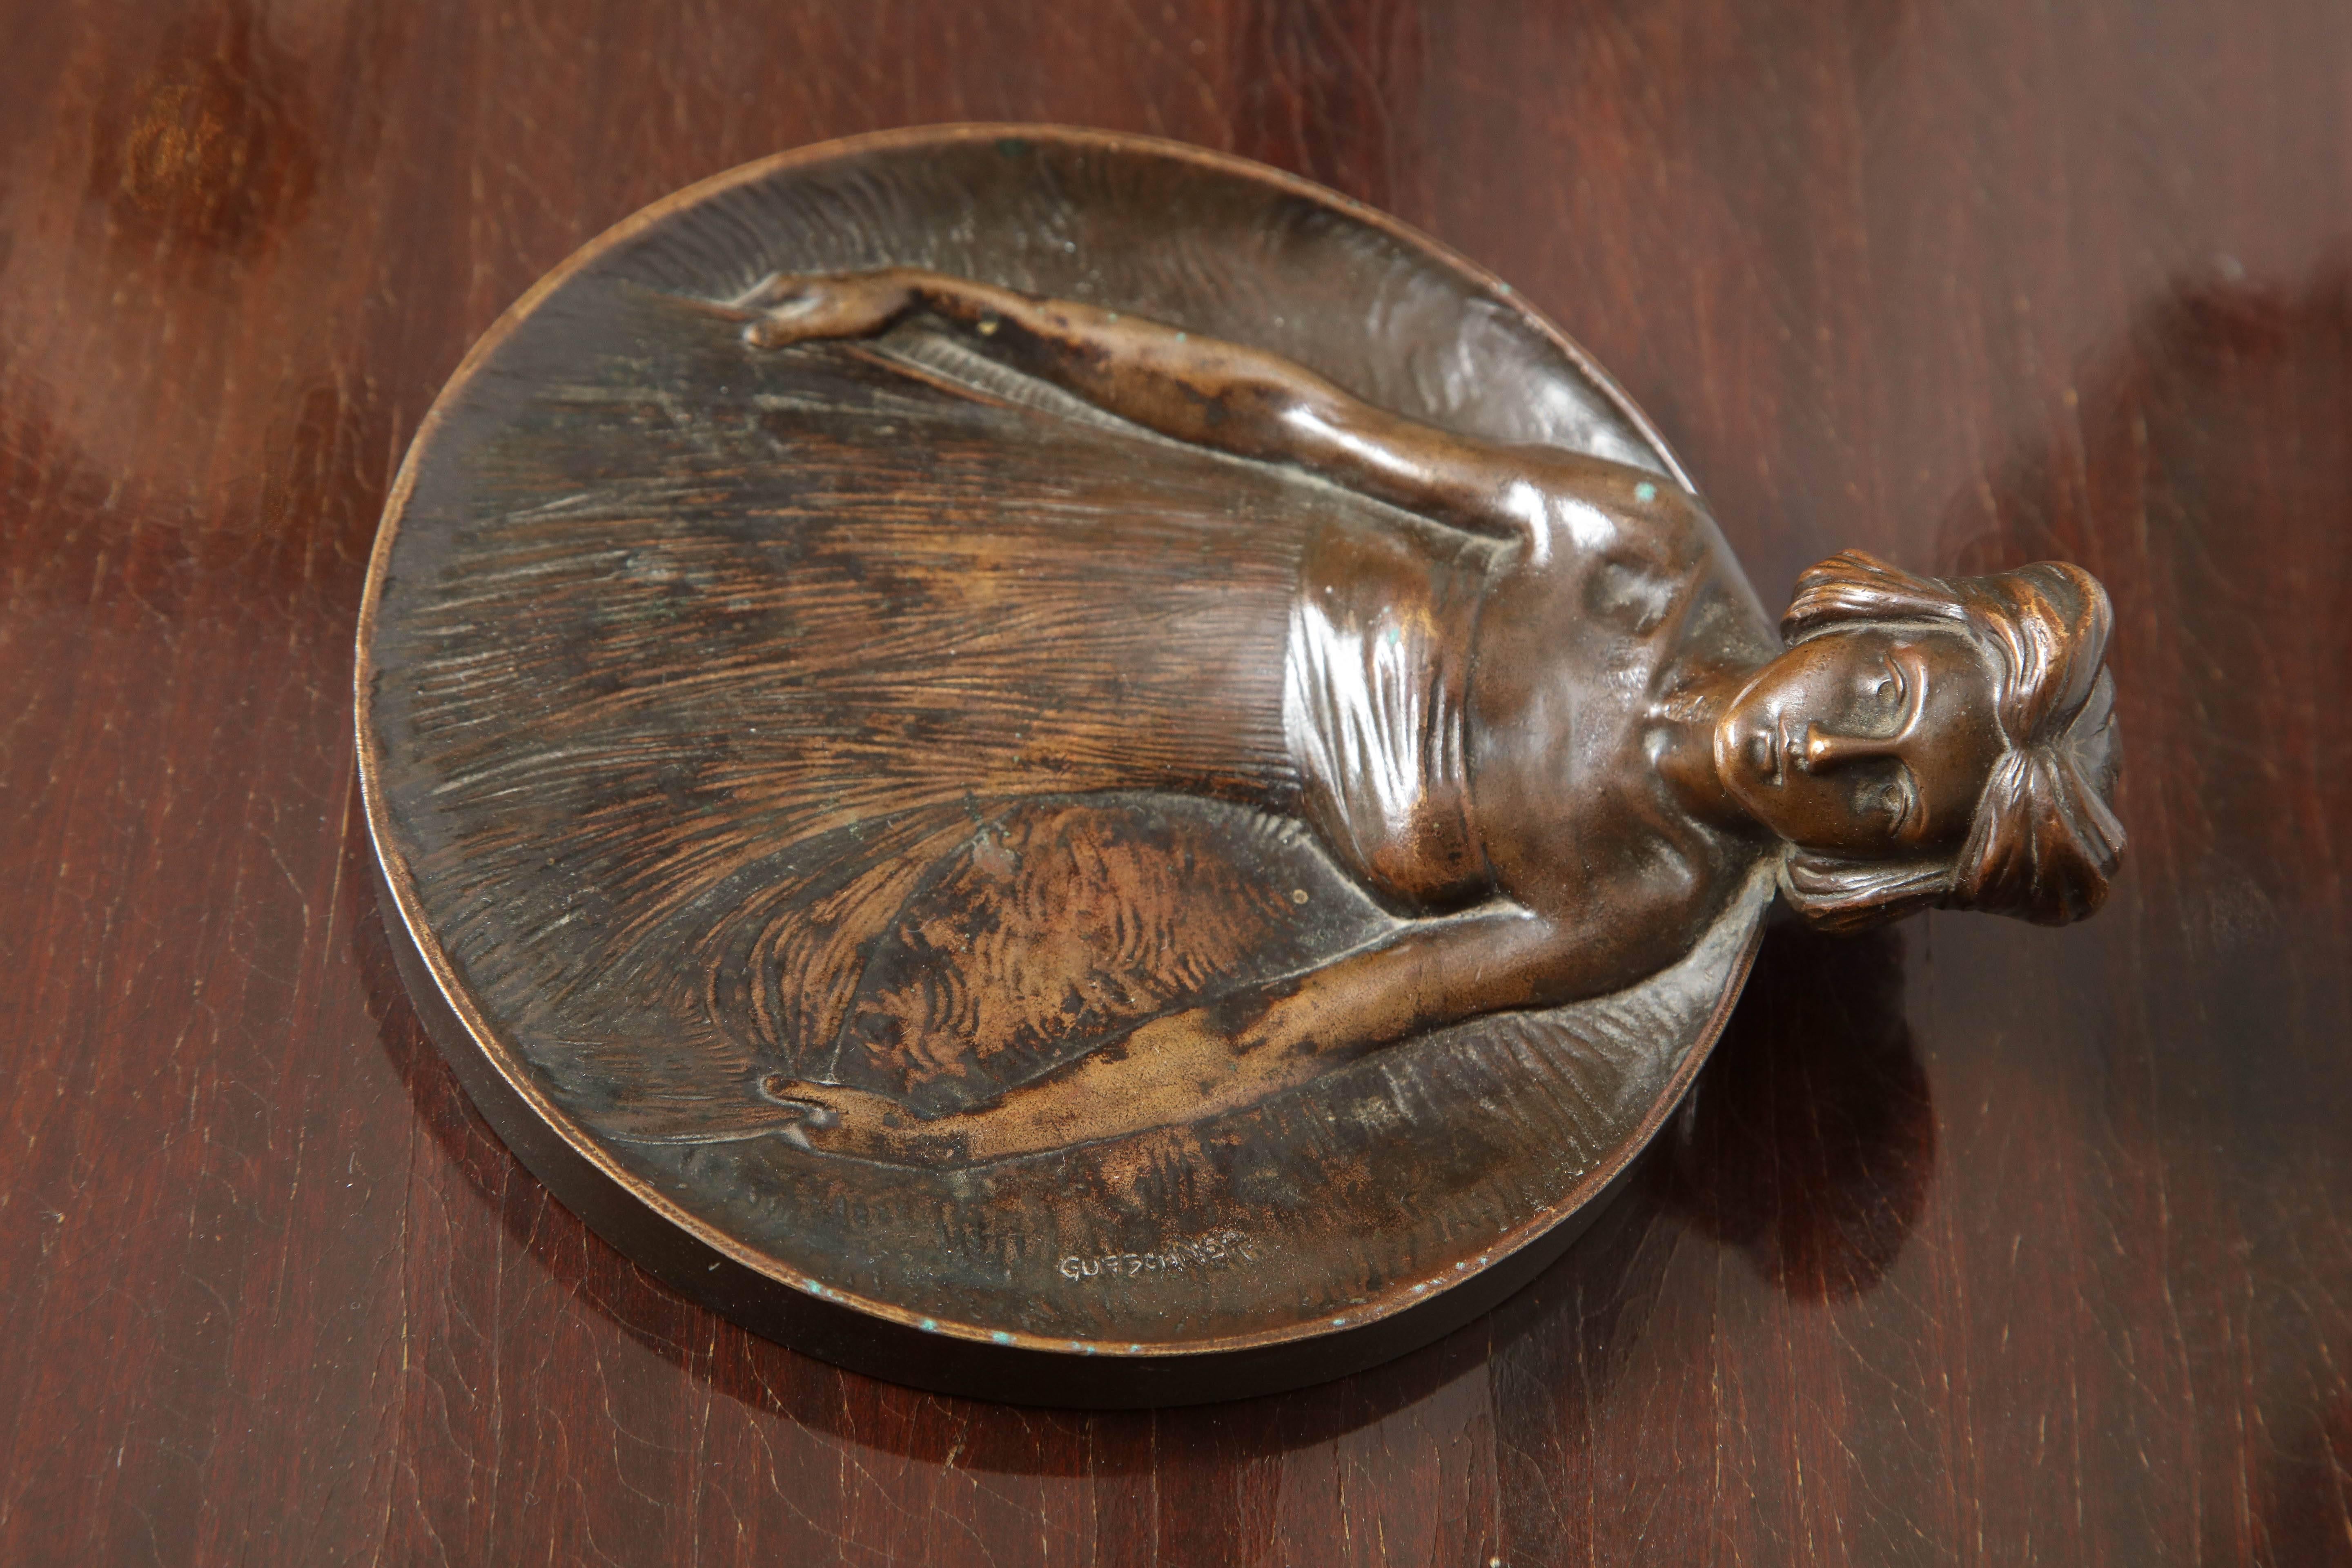 Bronze Art Nouveau tray in the form of a woman designed by Gustav Gurschner made in Vienna, Austria 1900. Signed  Gurschner on the insider boarder with the foundry mark on the outer rim, bottom is marked “Mod. N92”
 
Gustav Gurschner (1873–1970) was